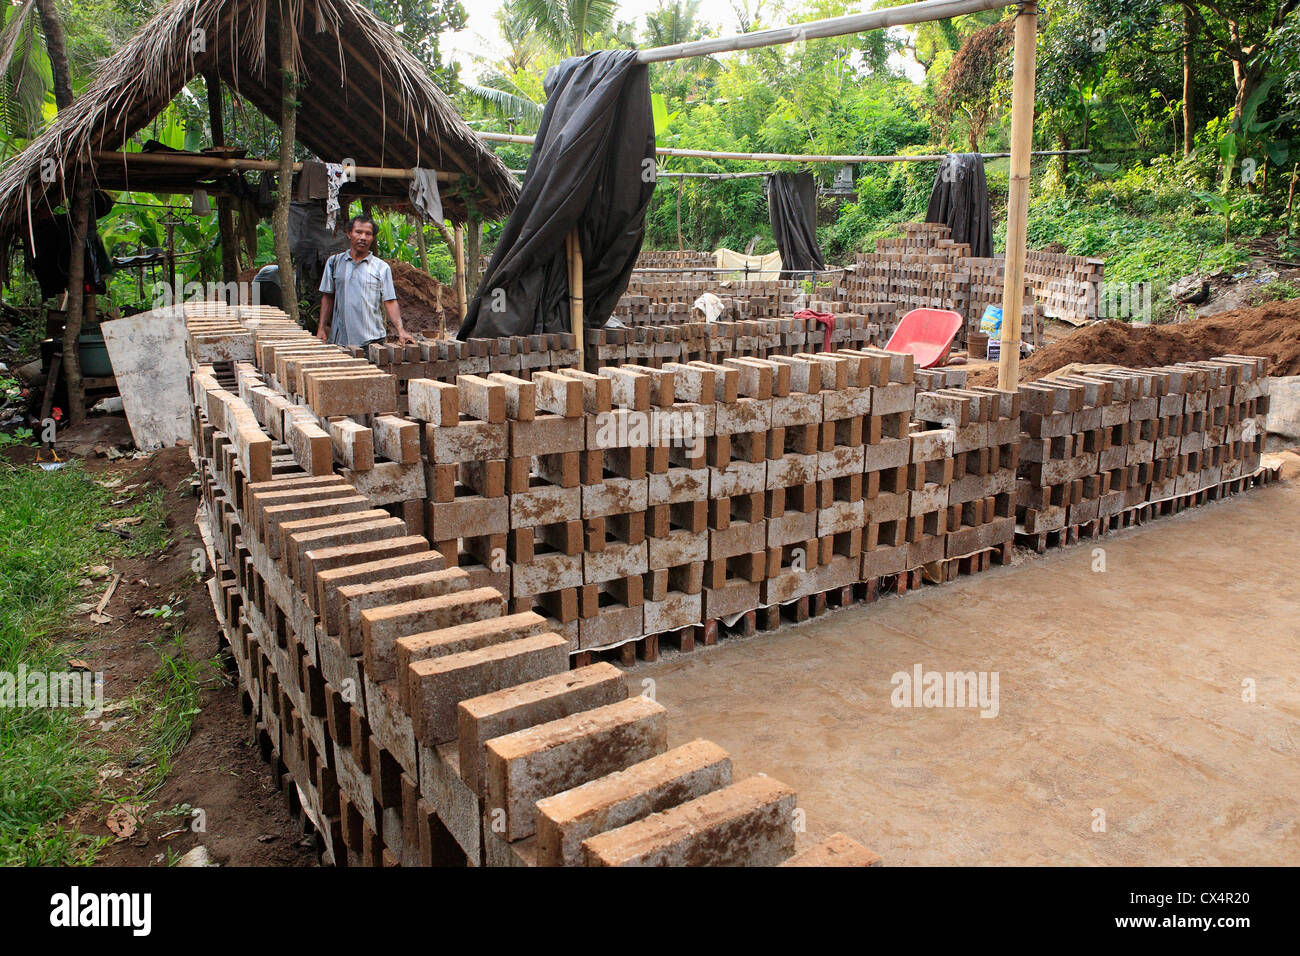 A factory for handmaking bricks, near Singaraja, north Bali, Indonesia. The bricks are made of clay, sun dried and then fired. Stock Photo